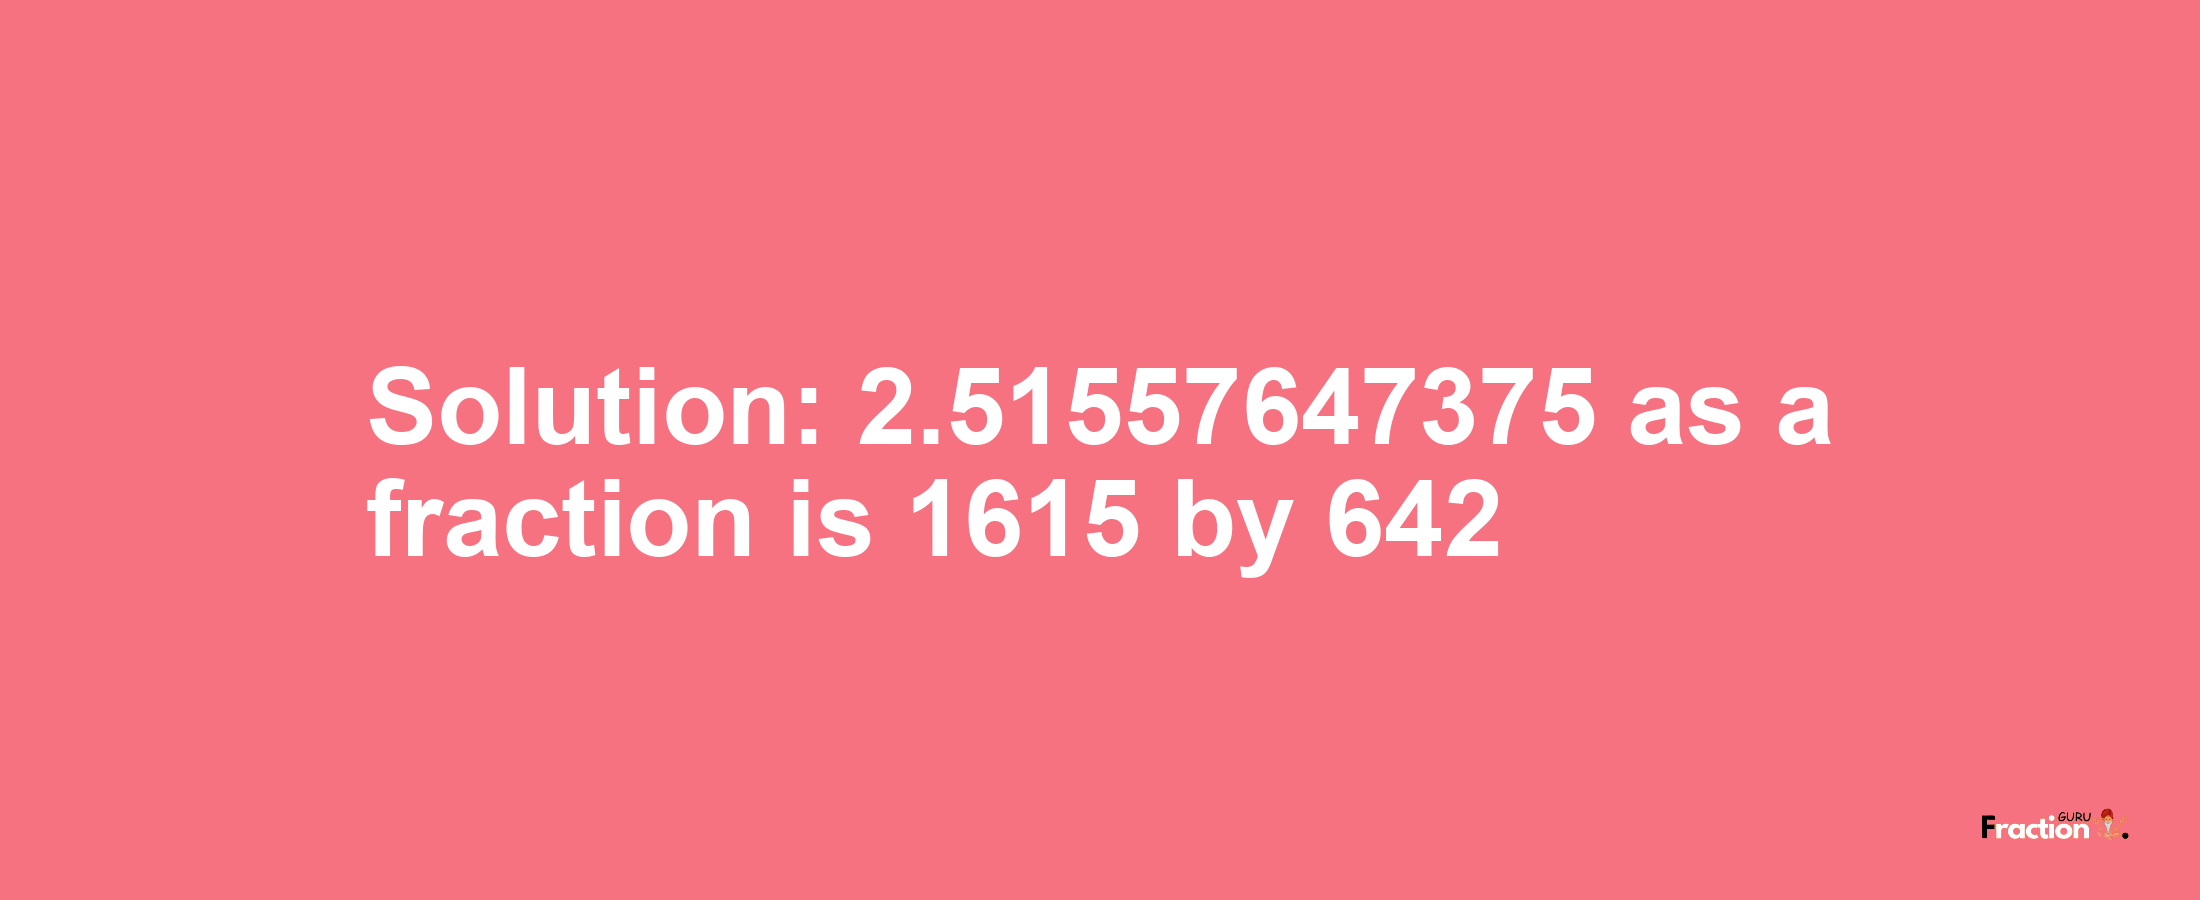 Solution:2.51557647375 as a fraction is 1615/642